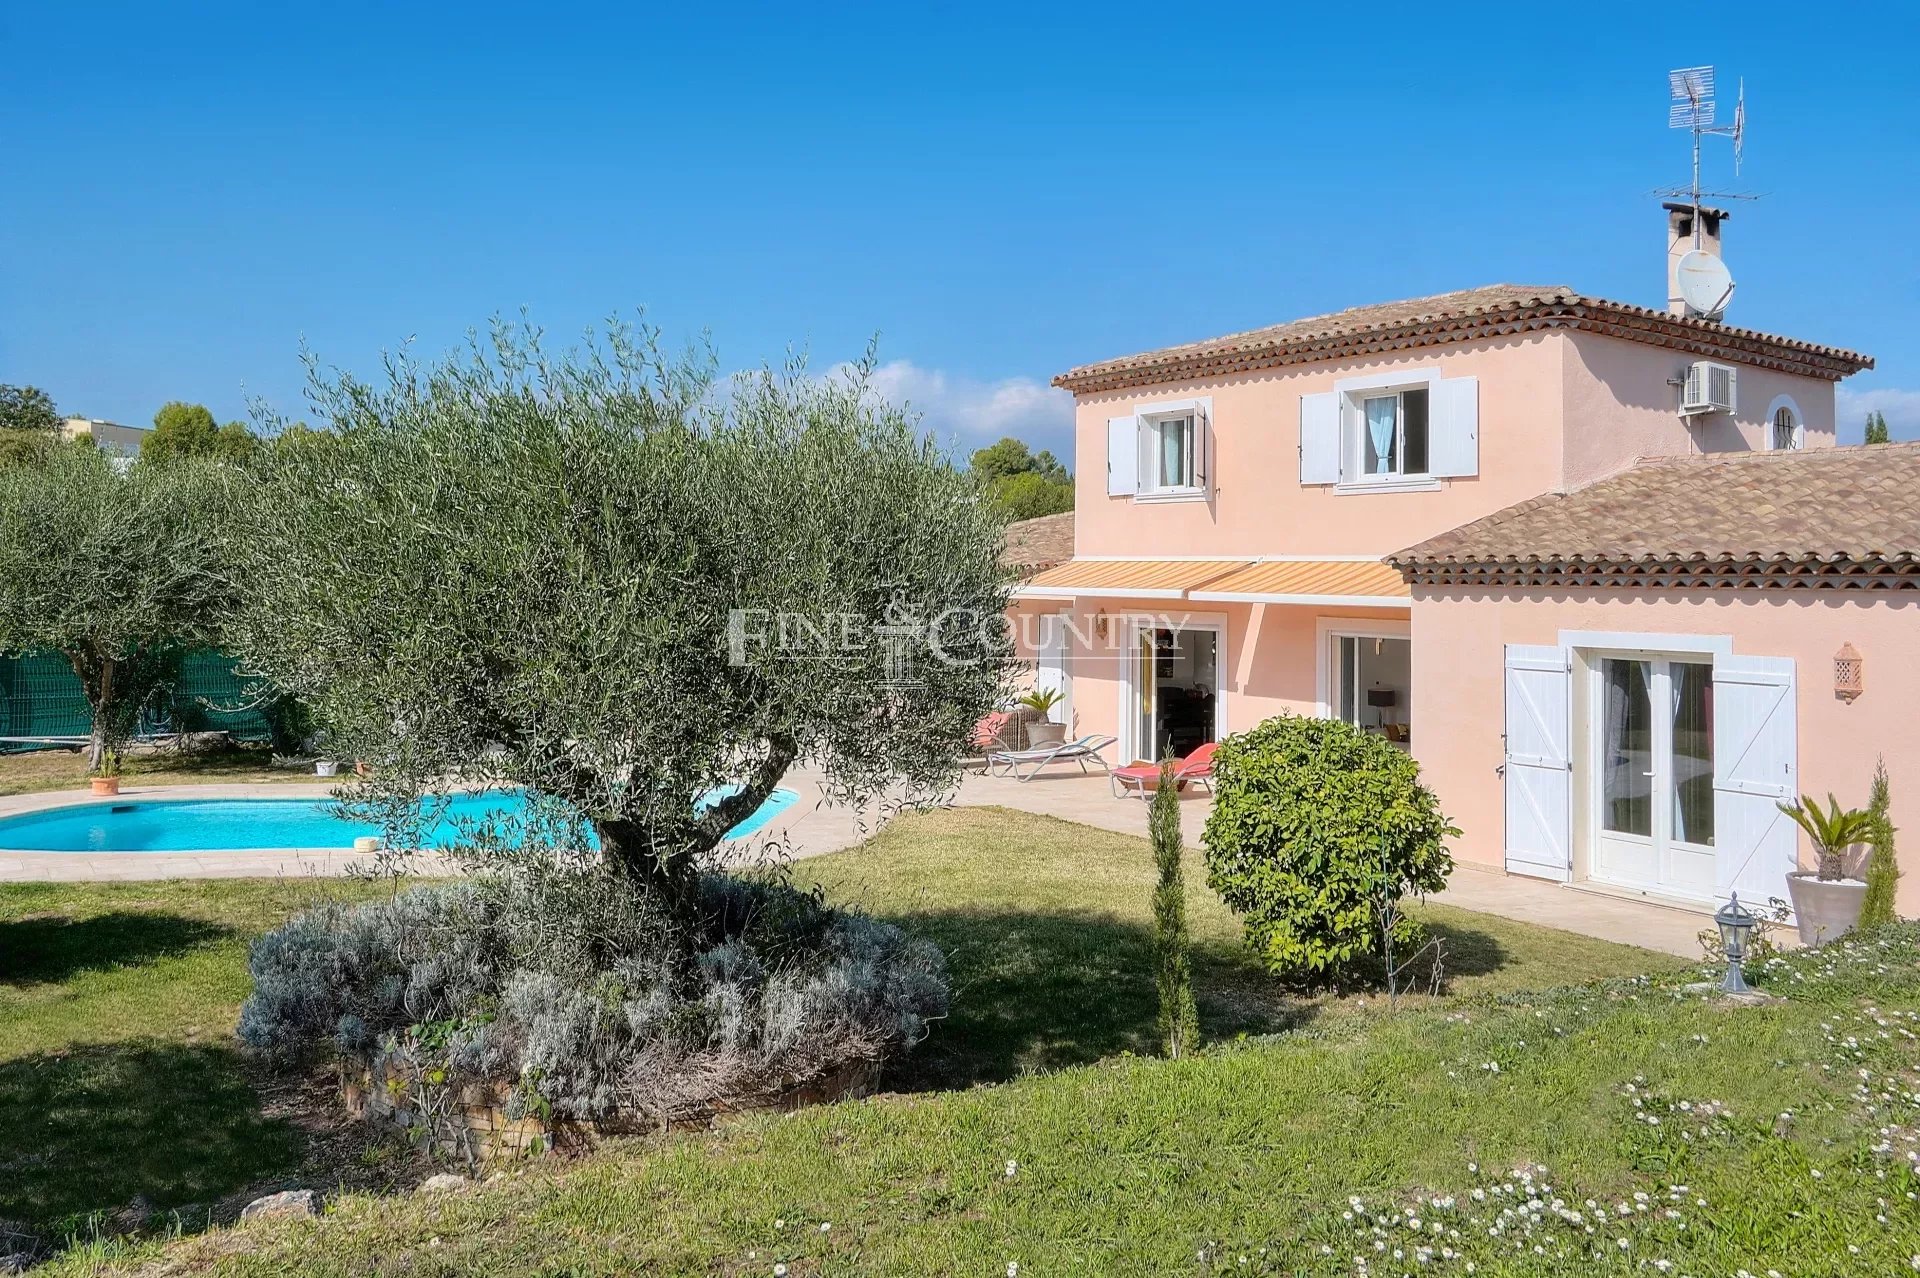 Villa for sale in Mouans-Sartoux Accommodation in Cannes